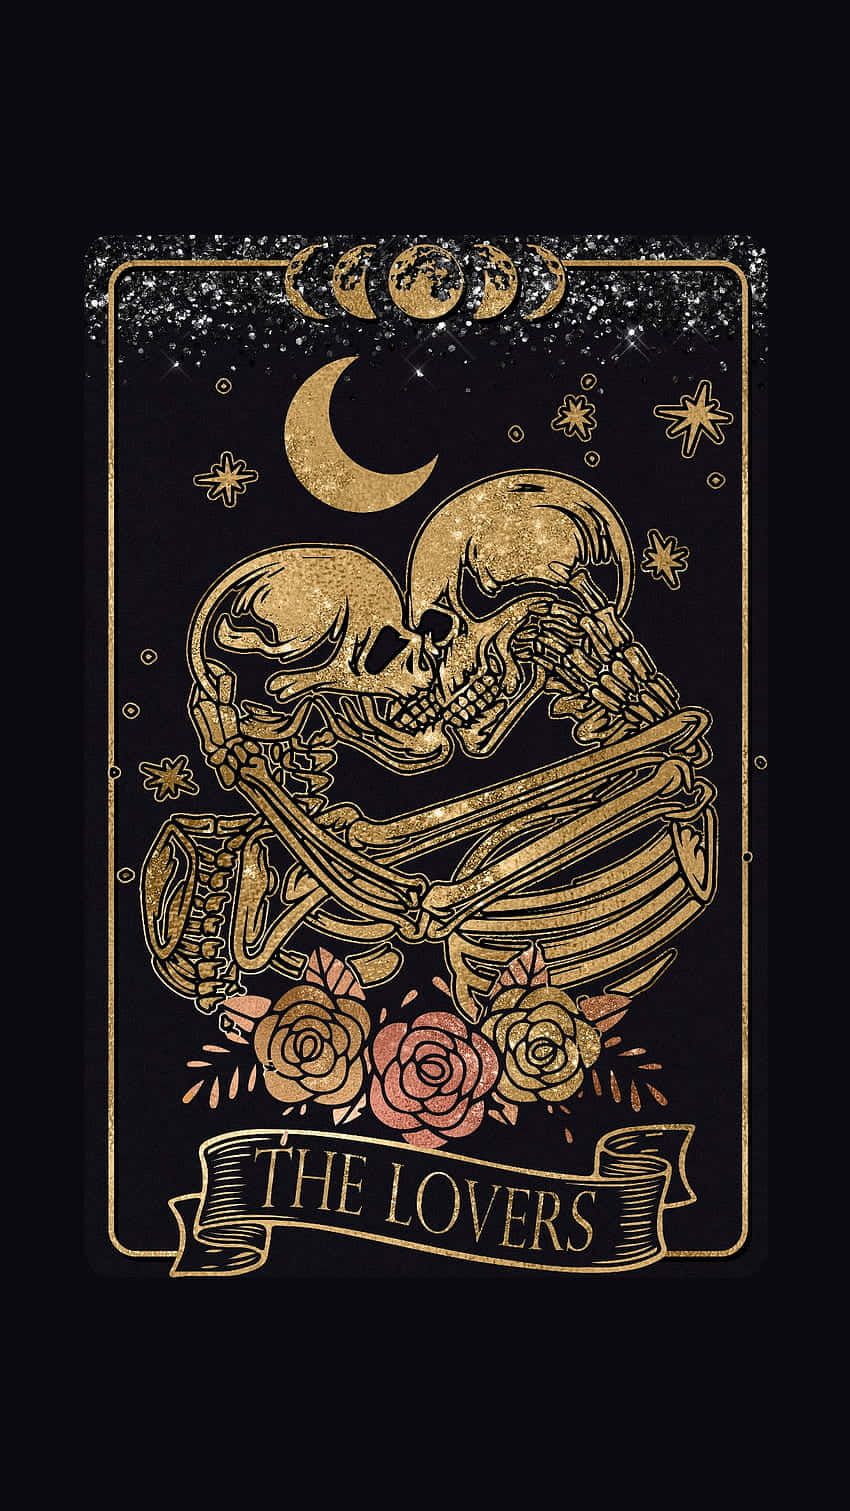 Gothic Tarot The Lovers Card Wallpaper